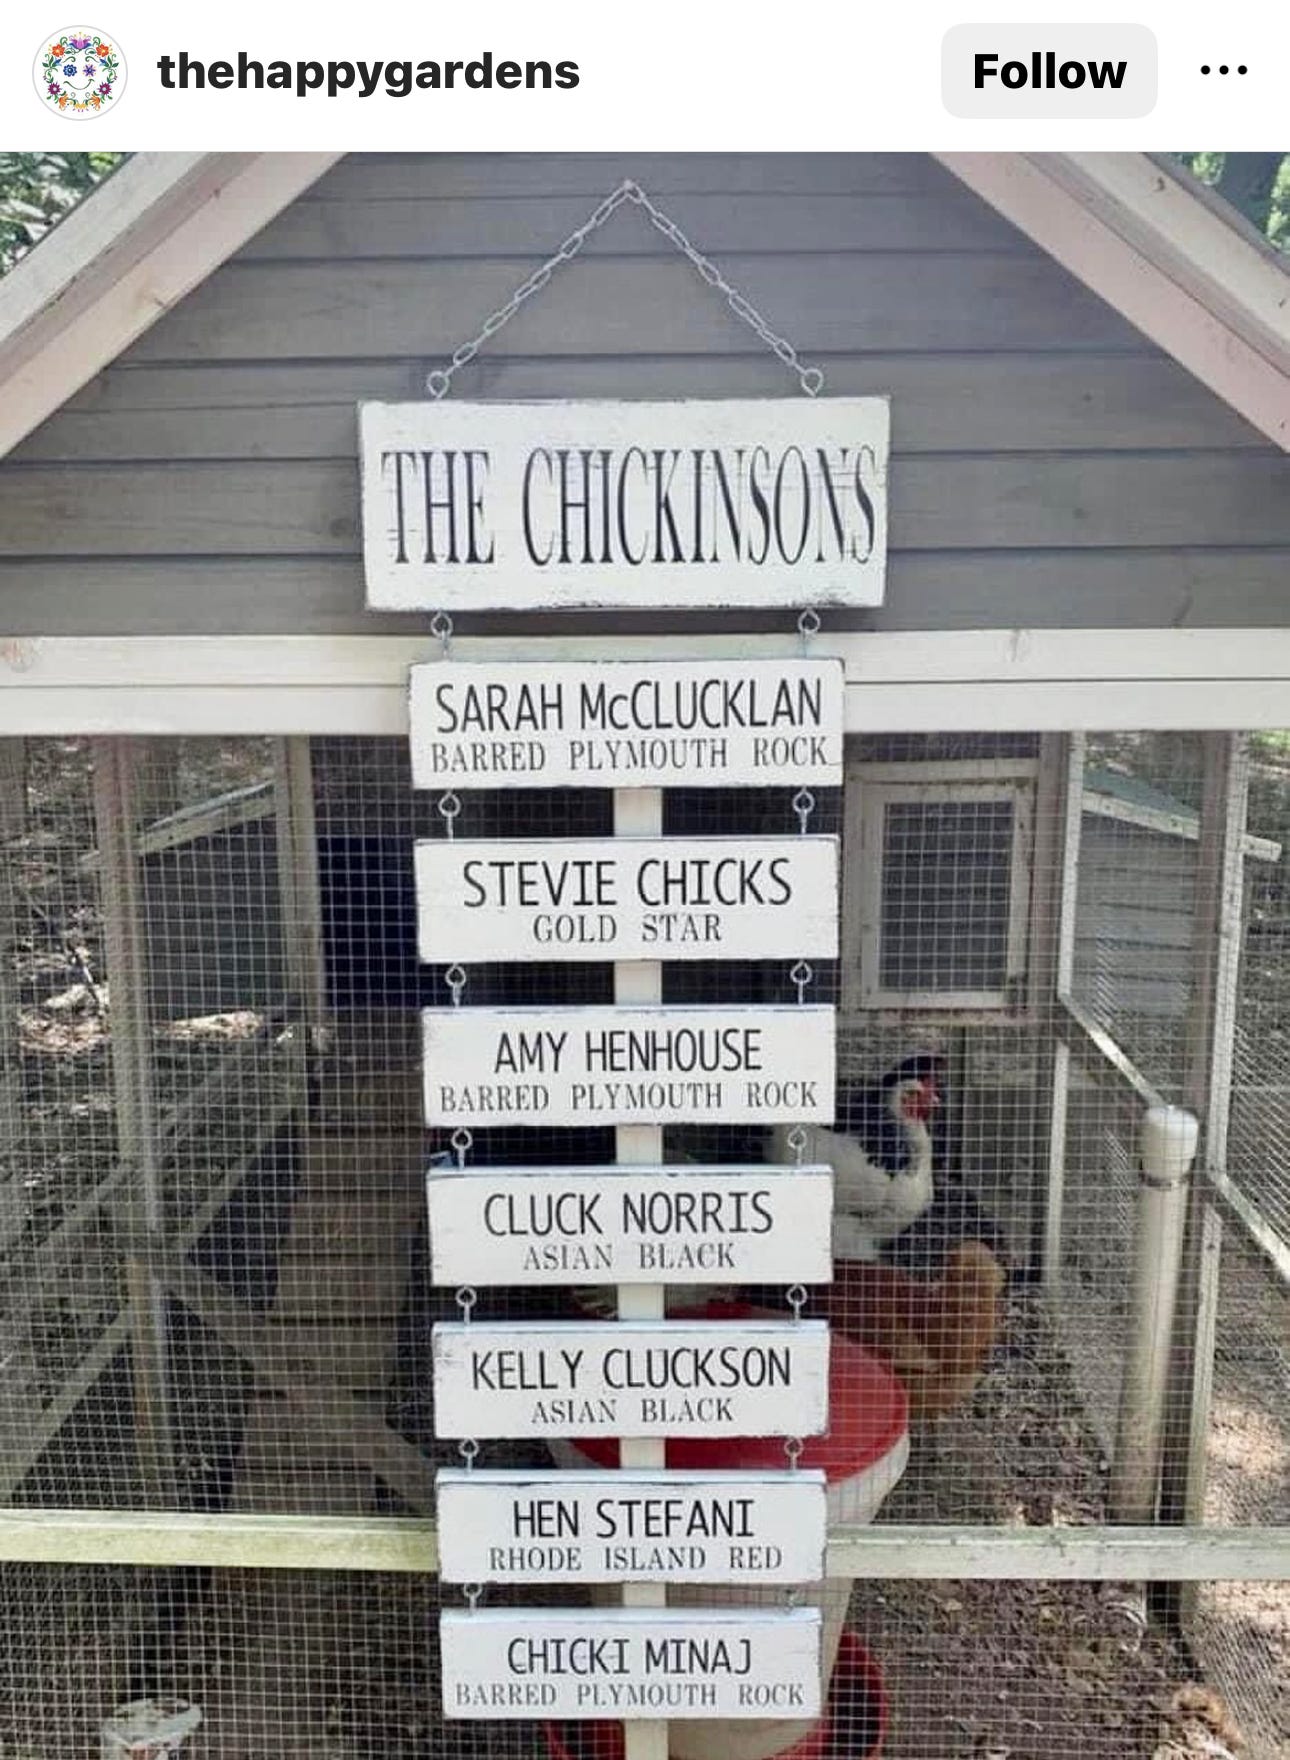 A chicken coop with signs bearing the names of its inhabitants, including Hen Stefani, Sarah McClucklan, and Stevie Chicks